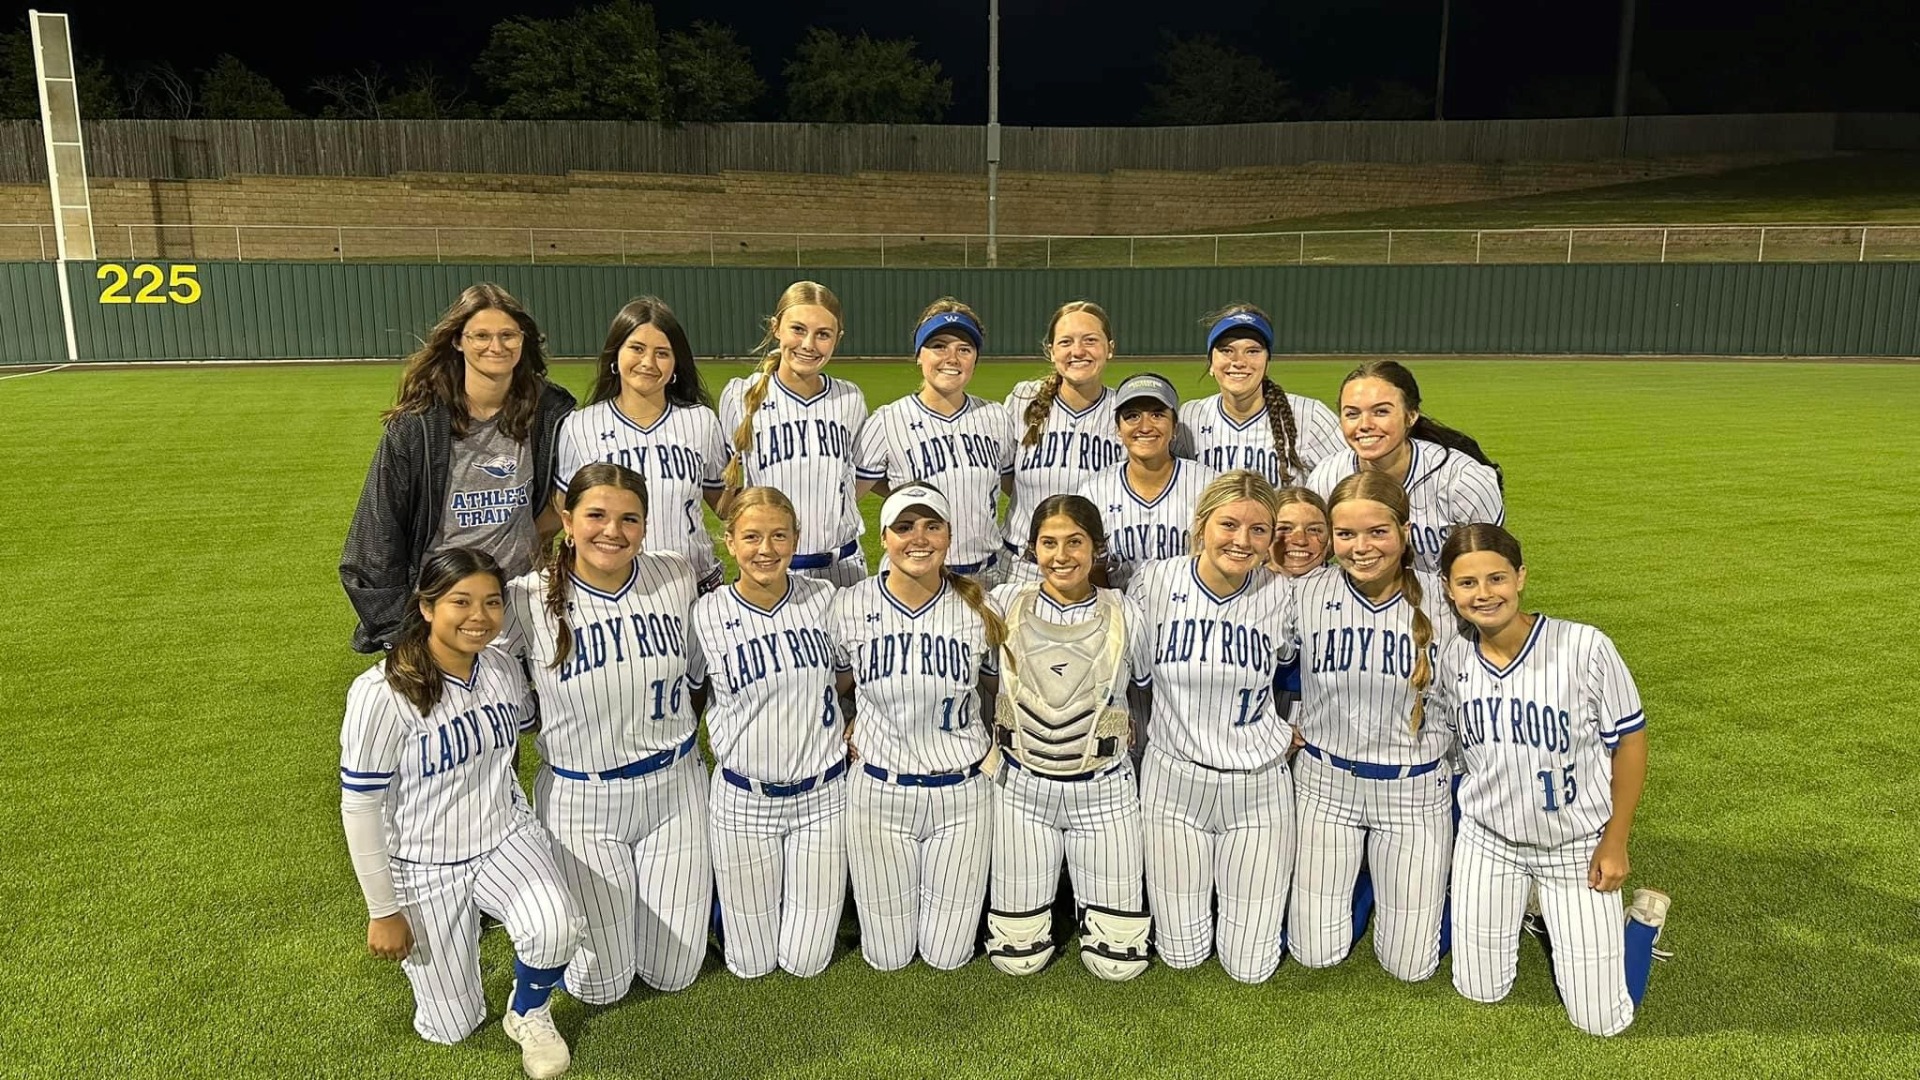 WeatherfordSlide 2 - Chandler and Kemp Lead the Lady Roos Over Boswell; Finish Second in District